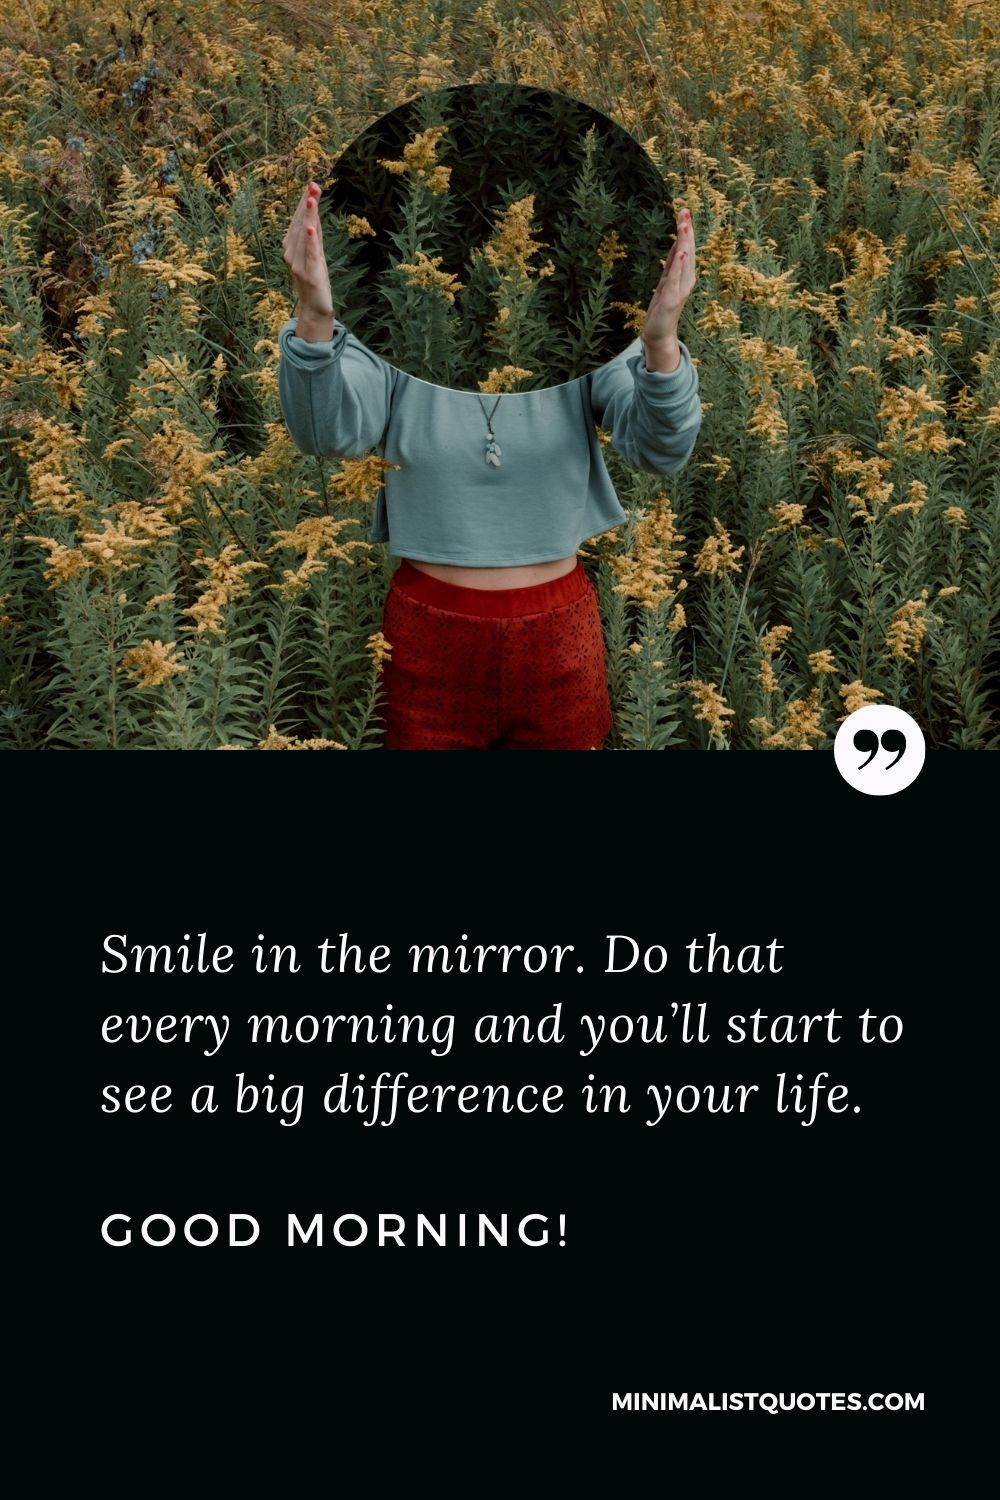 Smile in the mirror. Do that every morning and you'll start to see ...